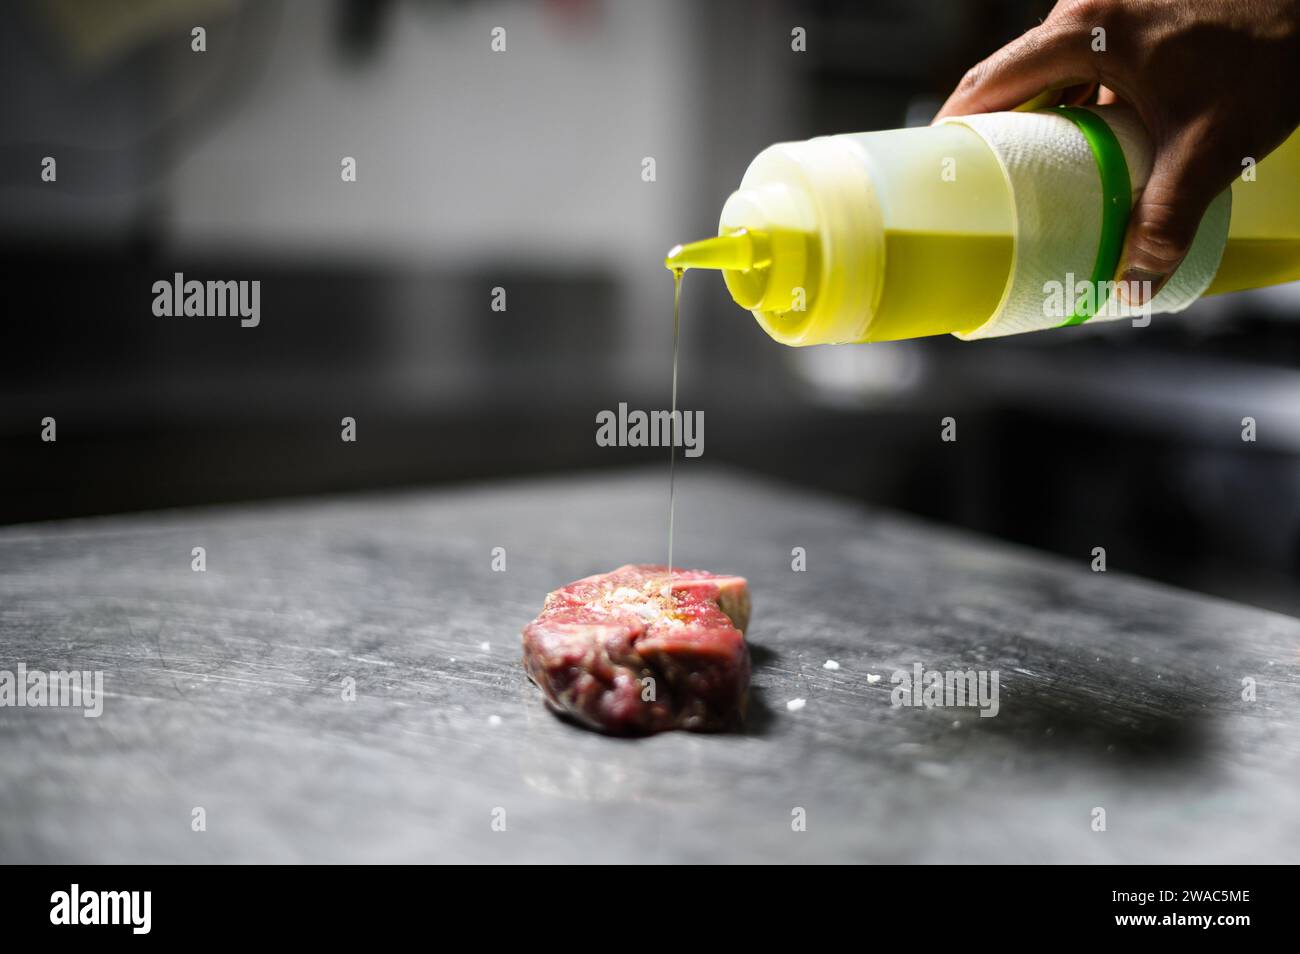 Chef pouring oil on a raw steak Stock Photo